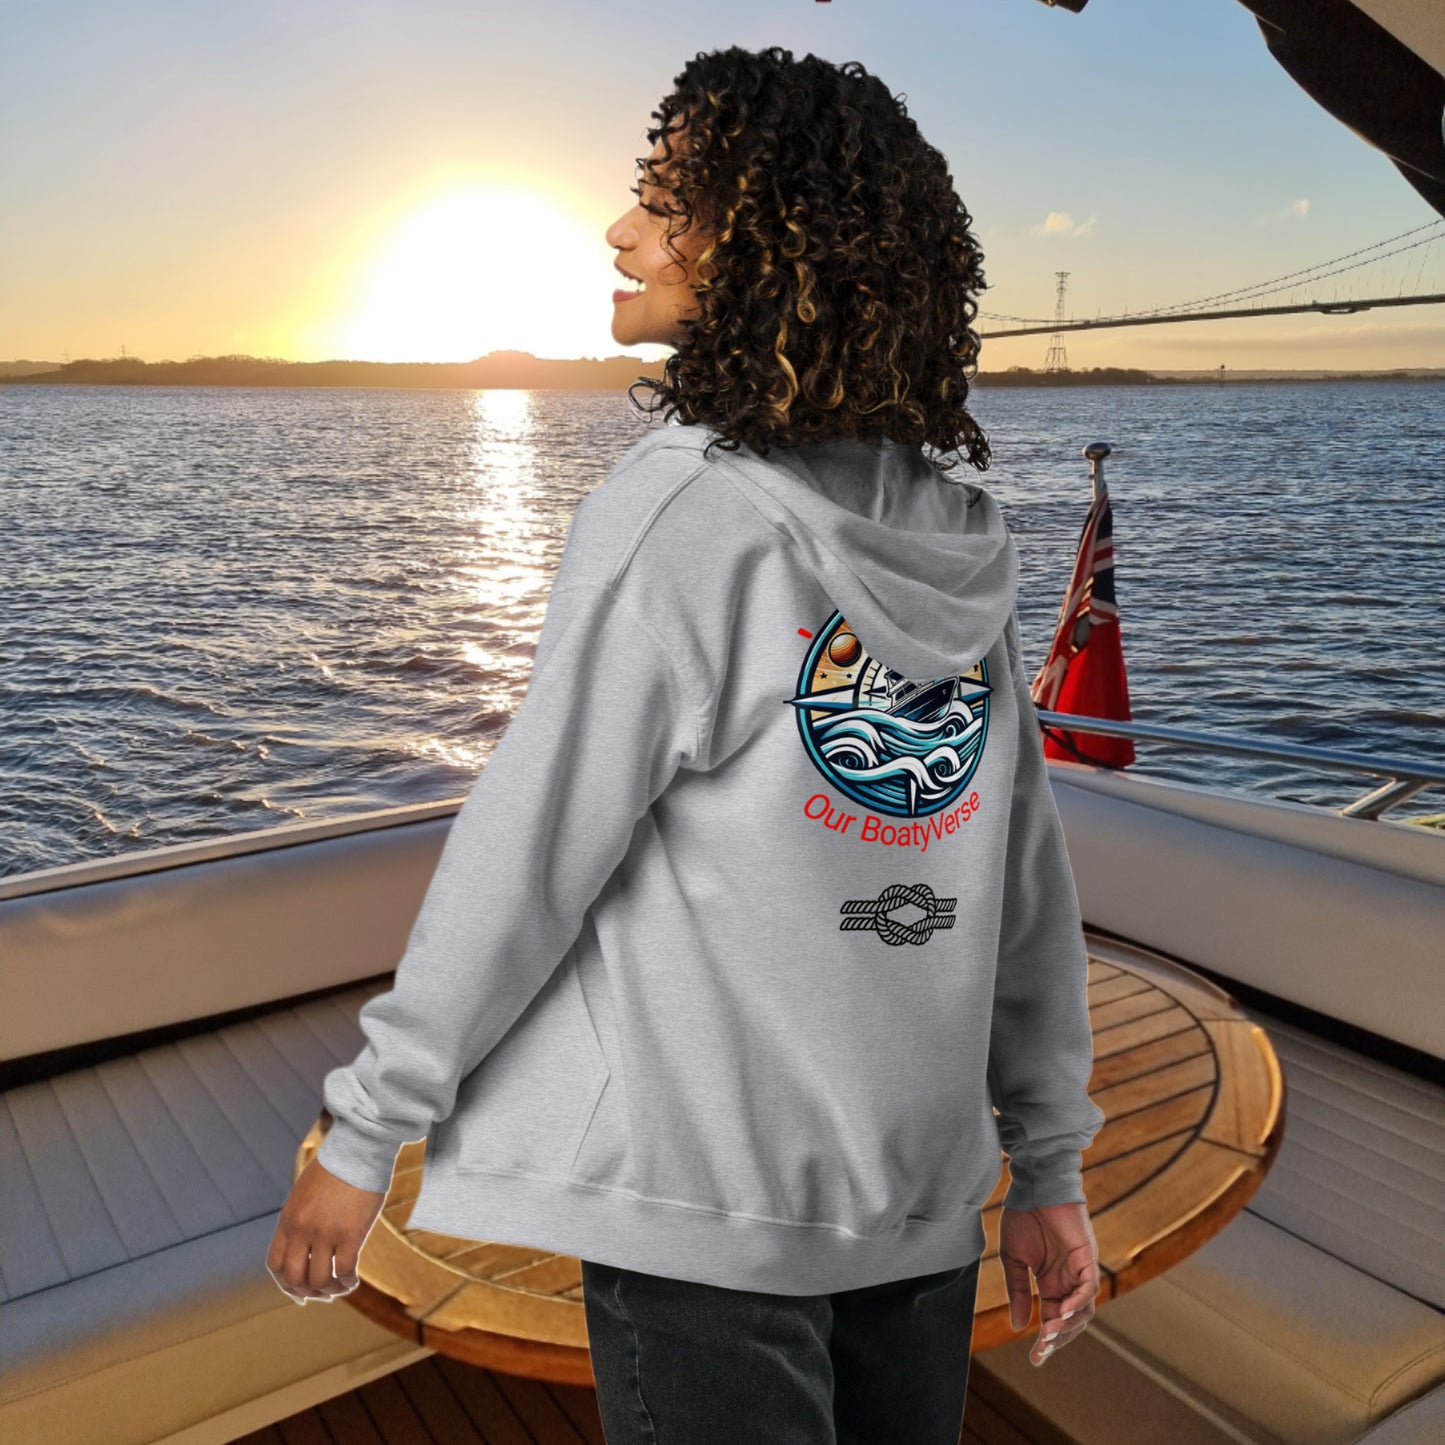 Mosaic Anchor heavy blend zip hoodie by OurBoatyVerse